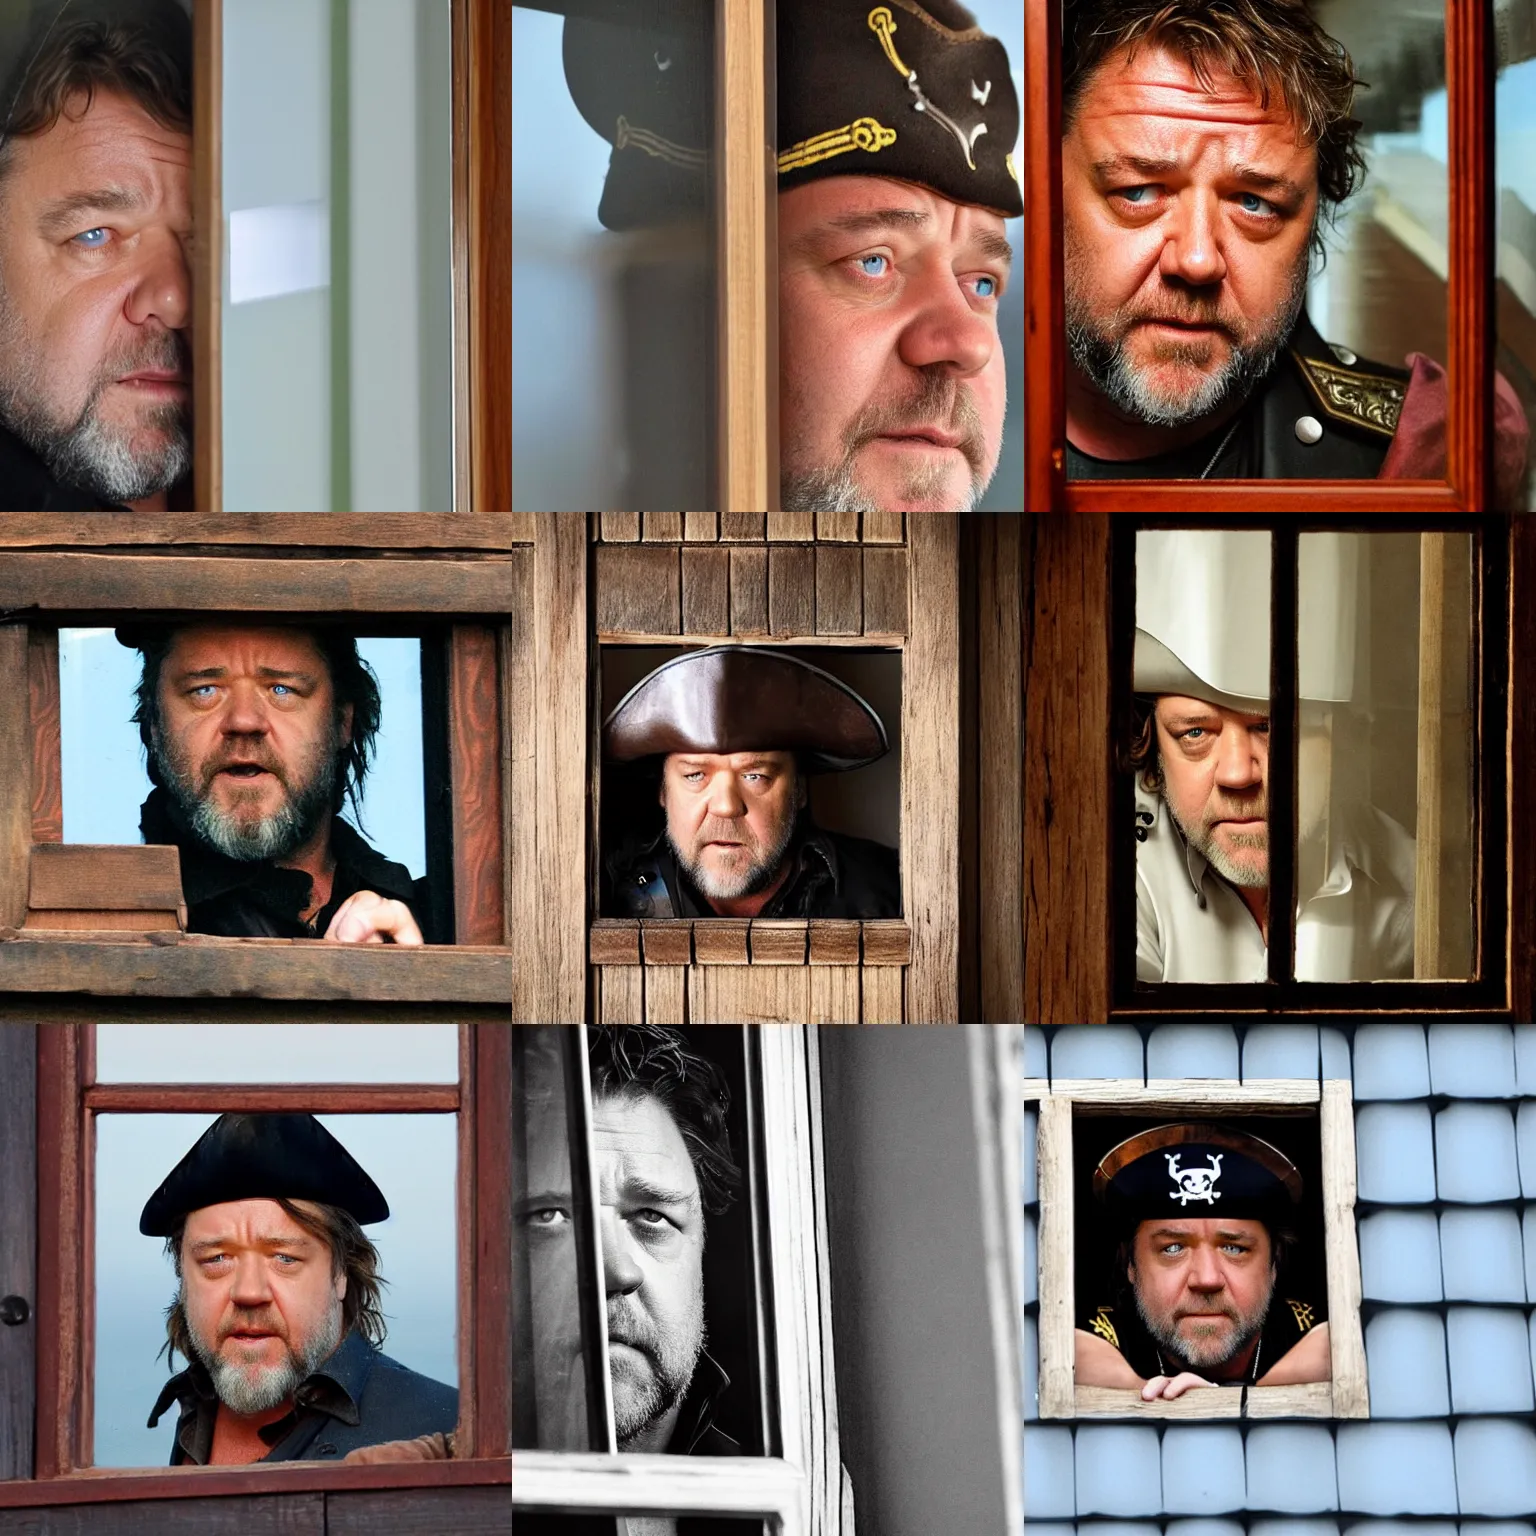 Prompt: russell crowe with large wide pirate captain hat peering out concerned down to camera from a small glass window in a wooden wall, 2 0 1 2